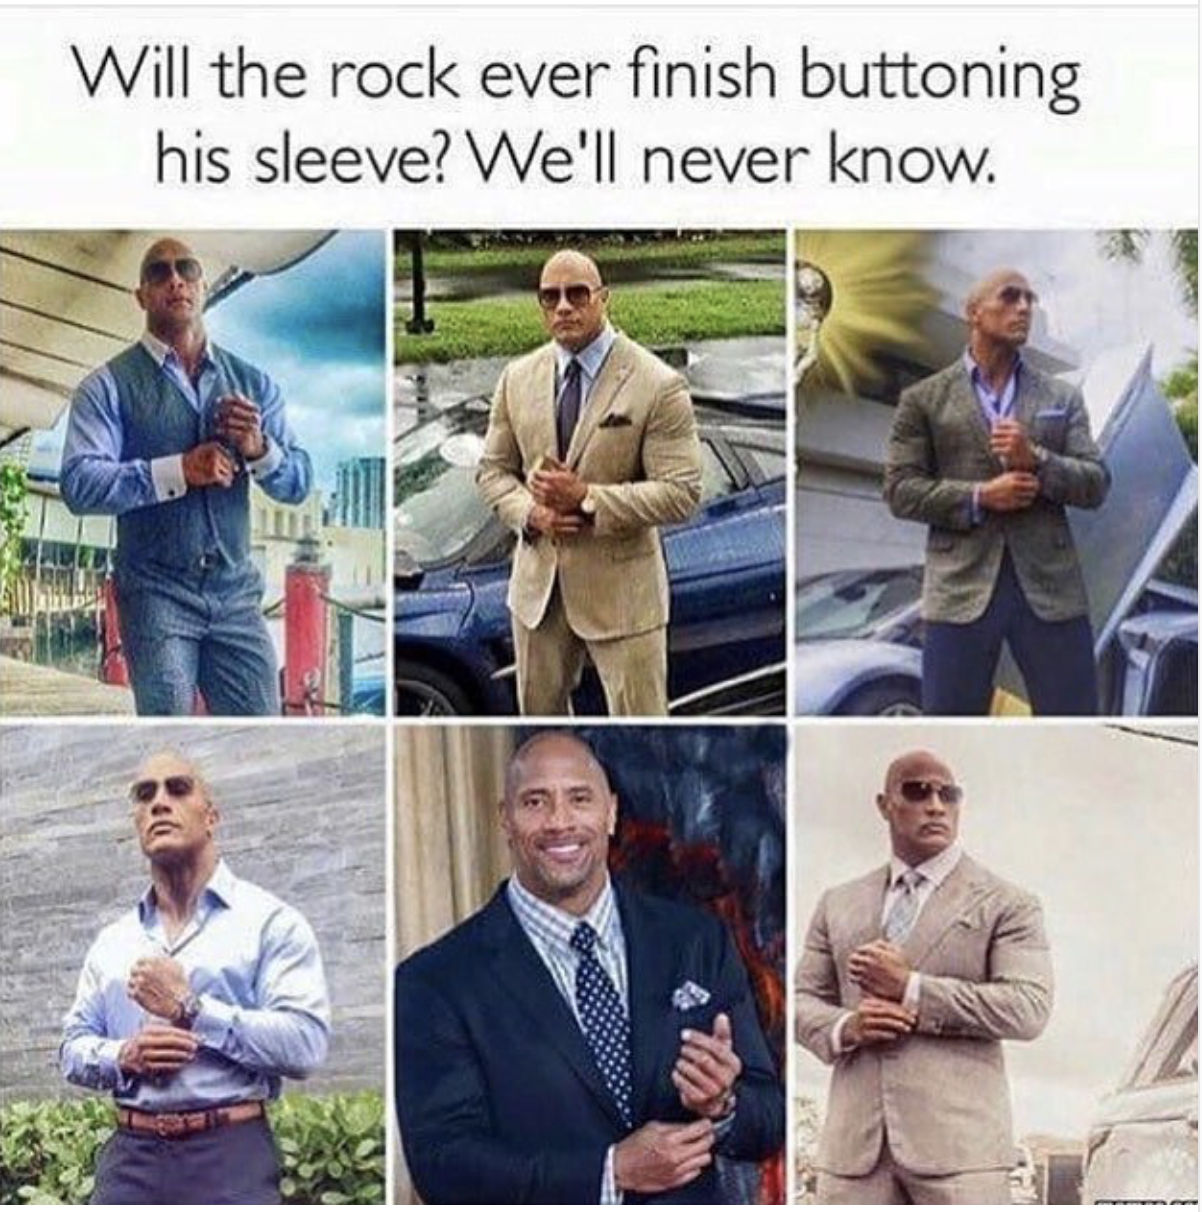 dwayne johnson meme - Will the rock ever finish buttoning his sleeve? We'll never know.